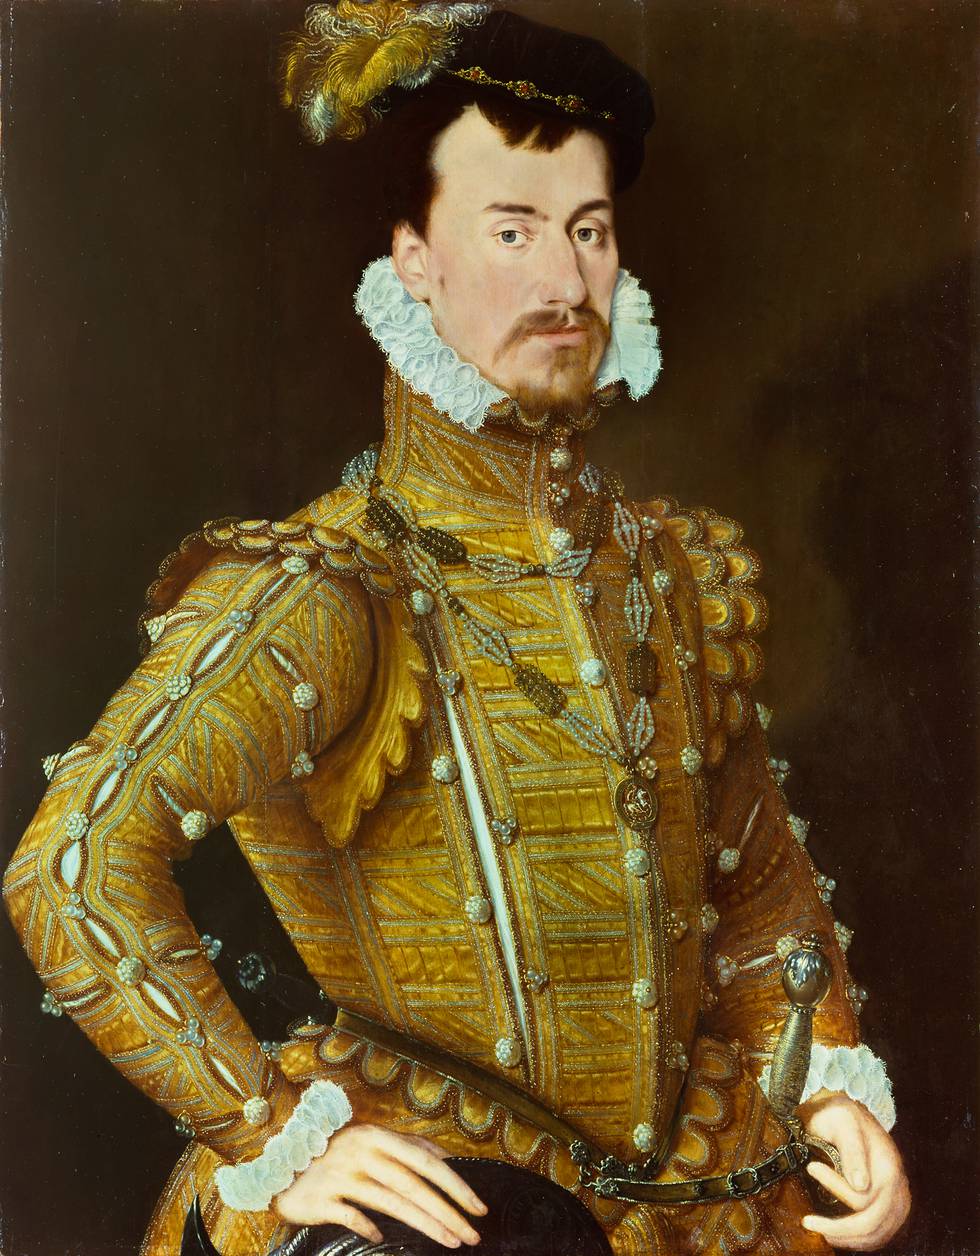 A painting of a man with a beard wearing a ruff